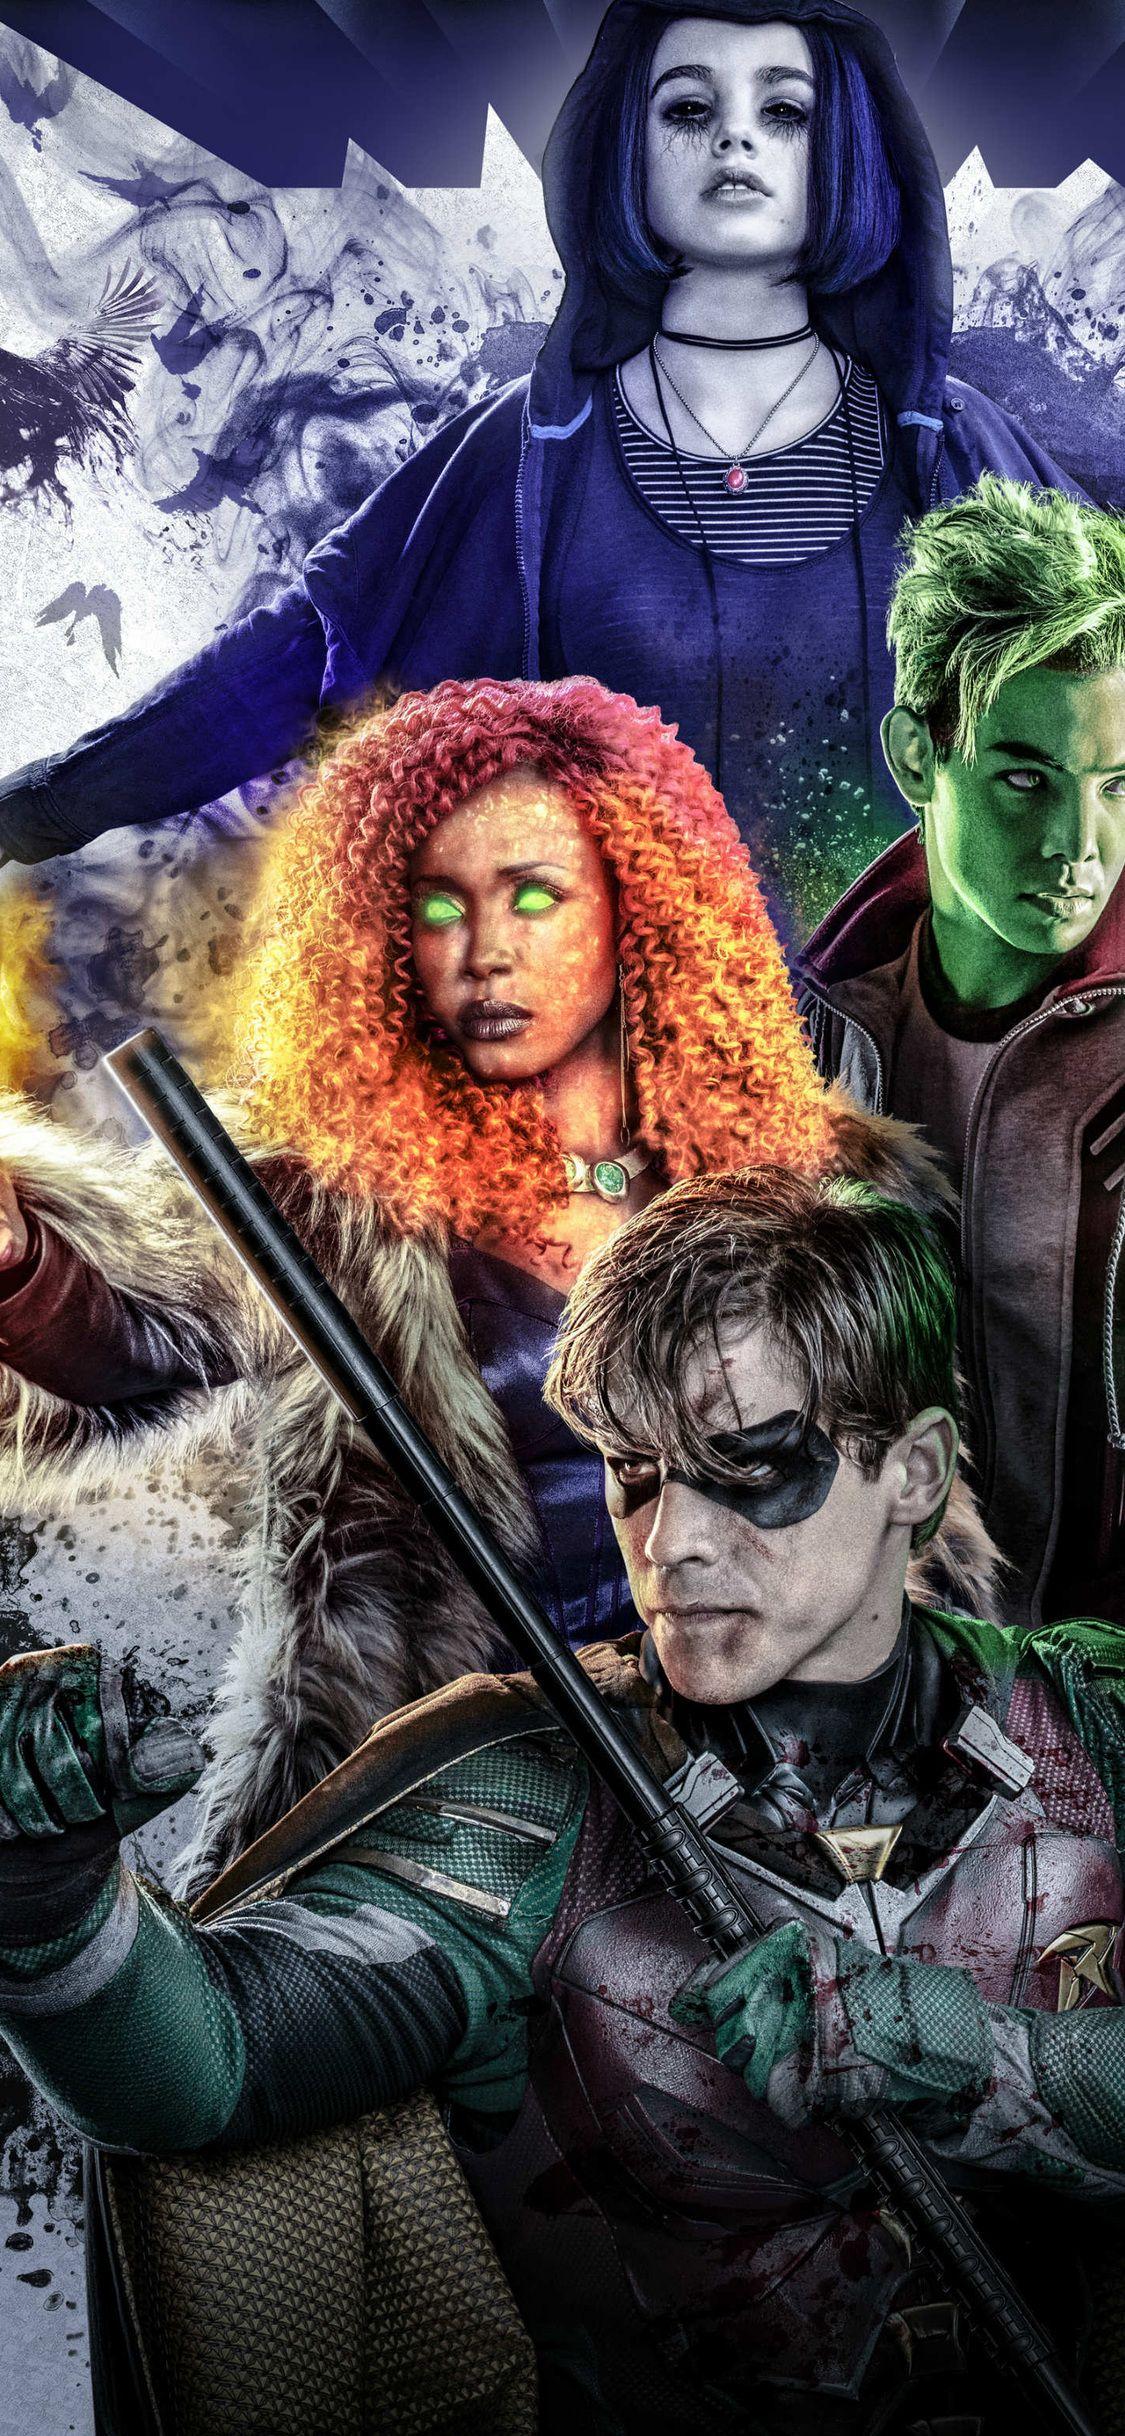 Beast Boy Raven And Starfire In Titans 2018 iPhone XS, iPhone iPhone X HD 4k Wallpaper, Image, Background, P. Beast boy, Starfire, Titans tv series